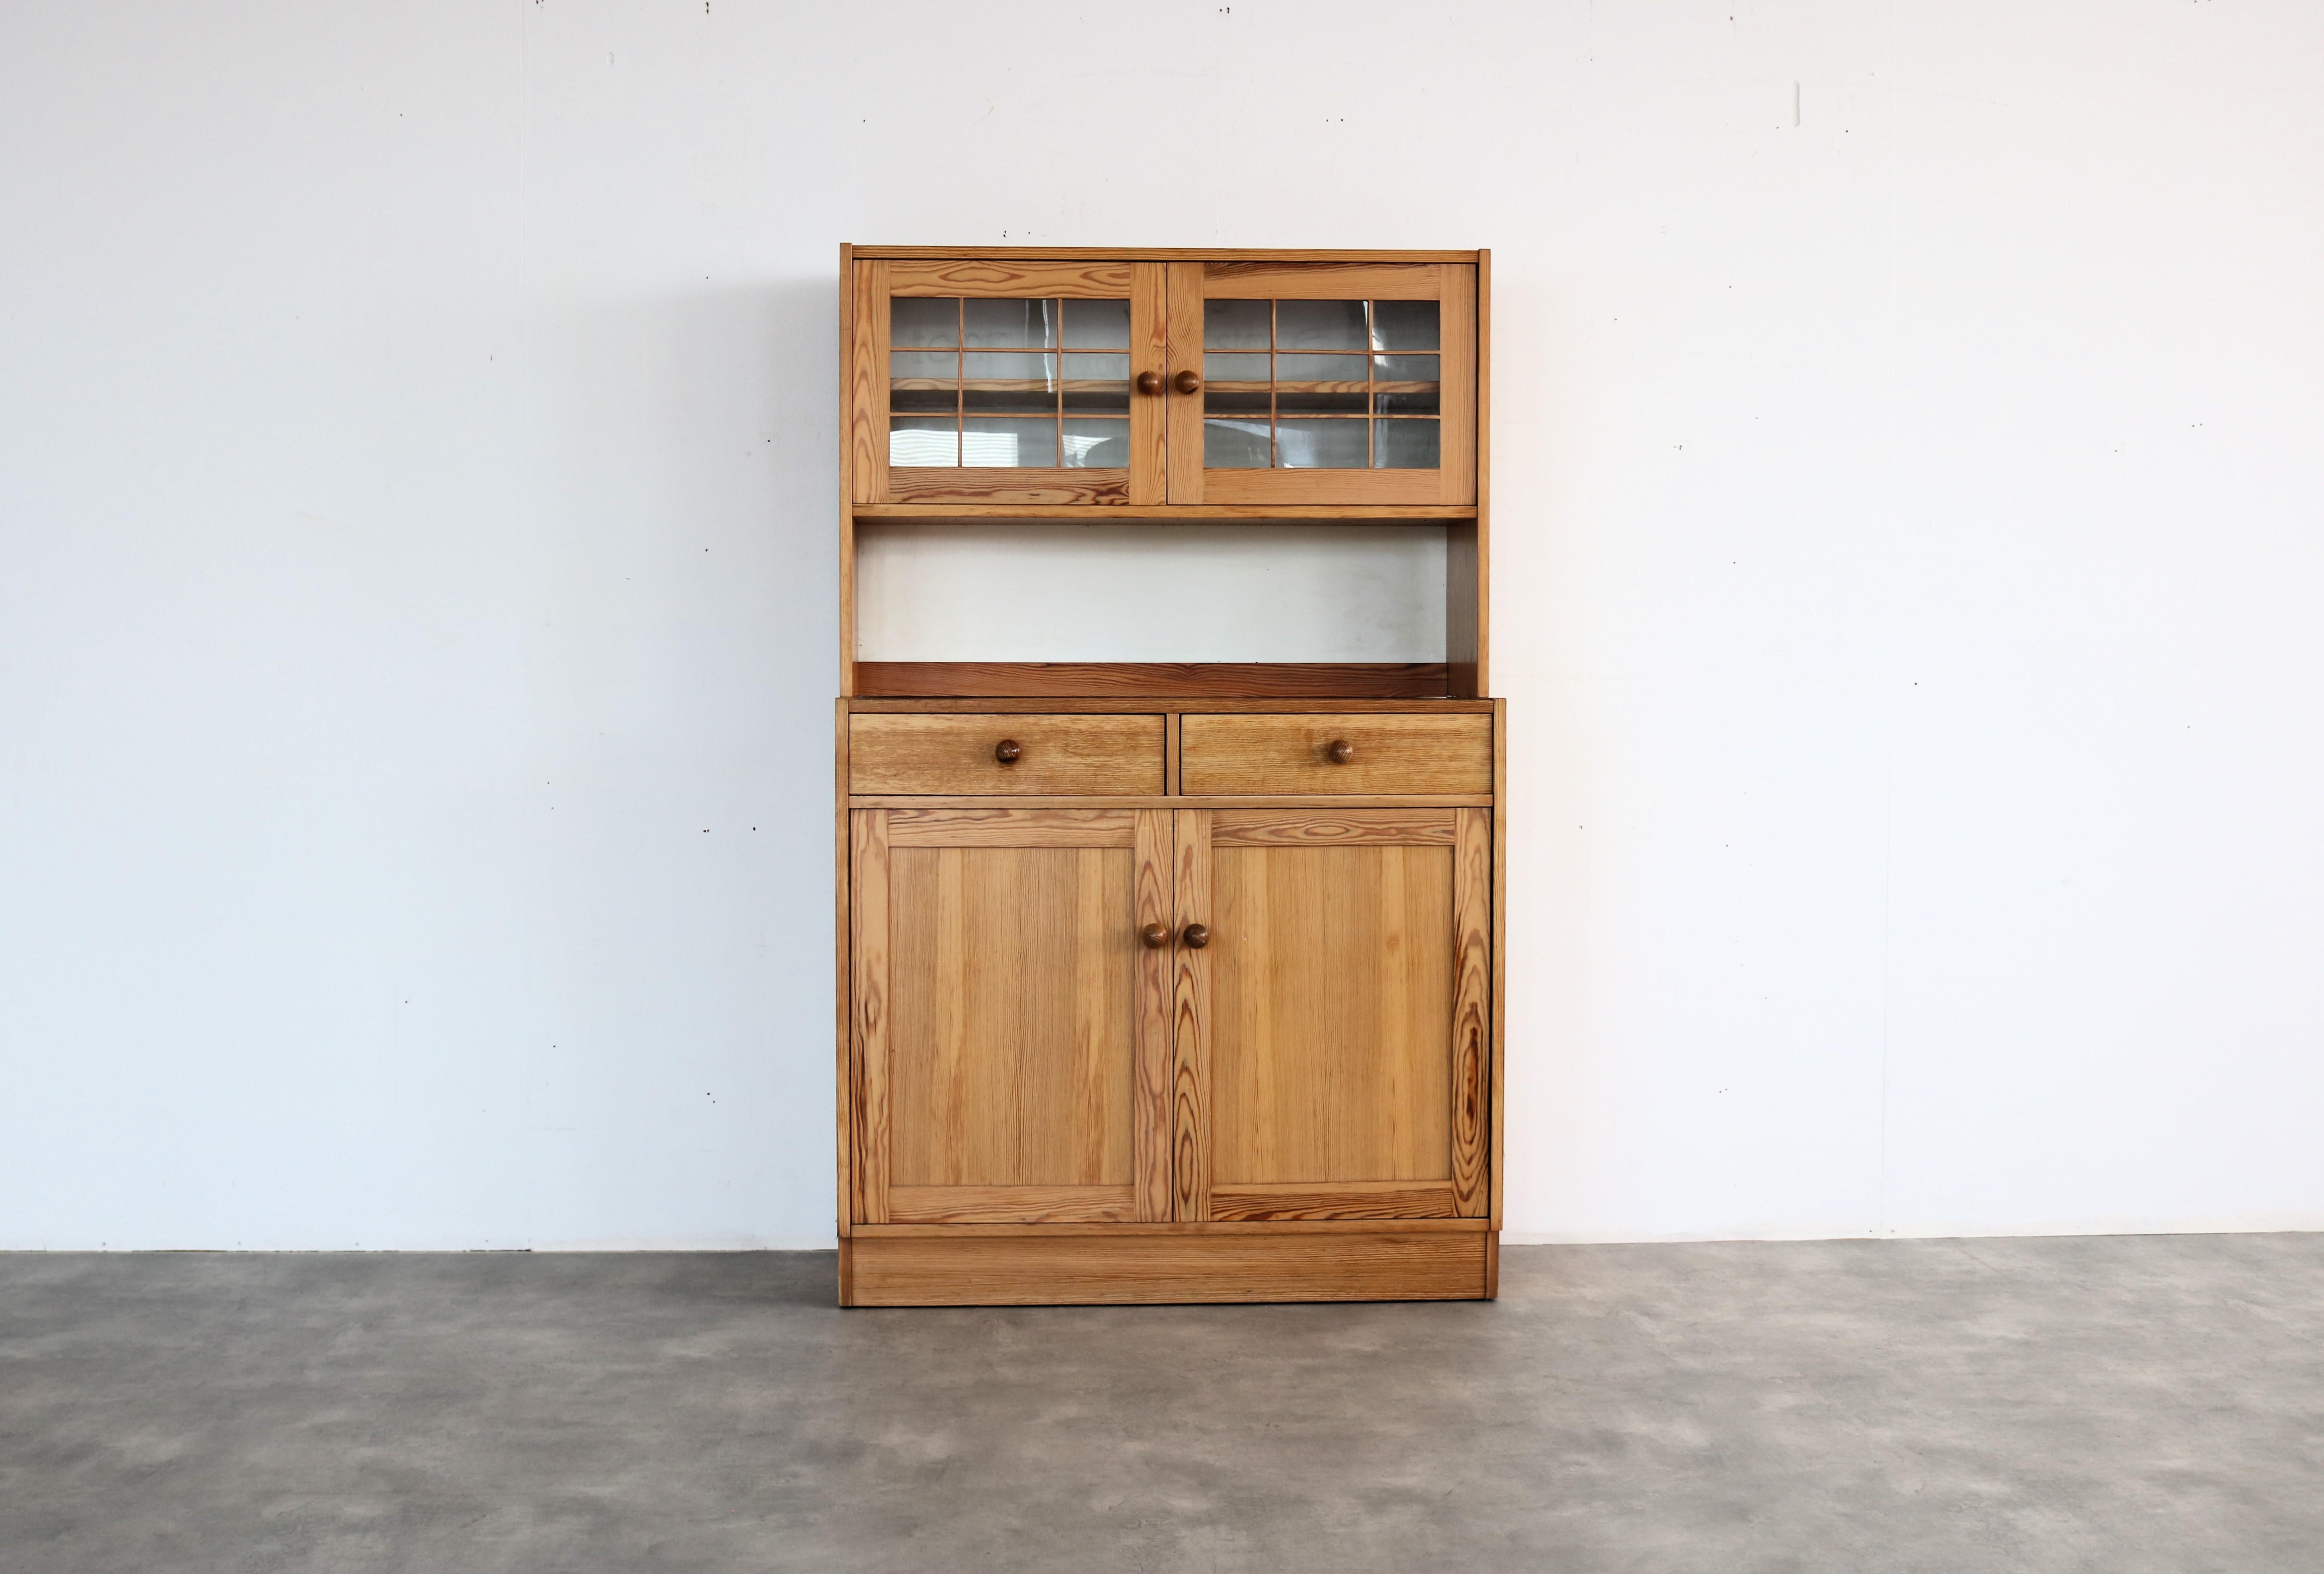 vintage sideboard | wall cupboard | pine | Sweden

period | 70s
design | unknown | Sweden
condition | good | light signs of use
size | 170 x 105.5 x 45 (hxwxd)

details | pine; glass;

article number | 2176